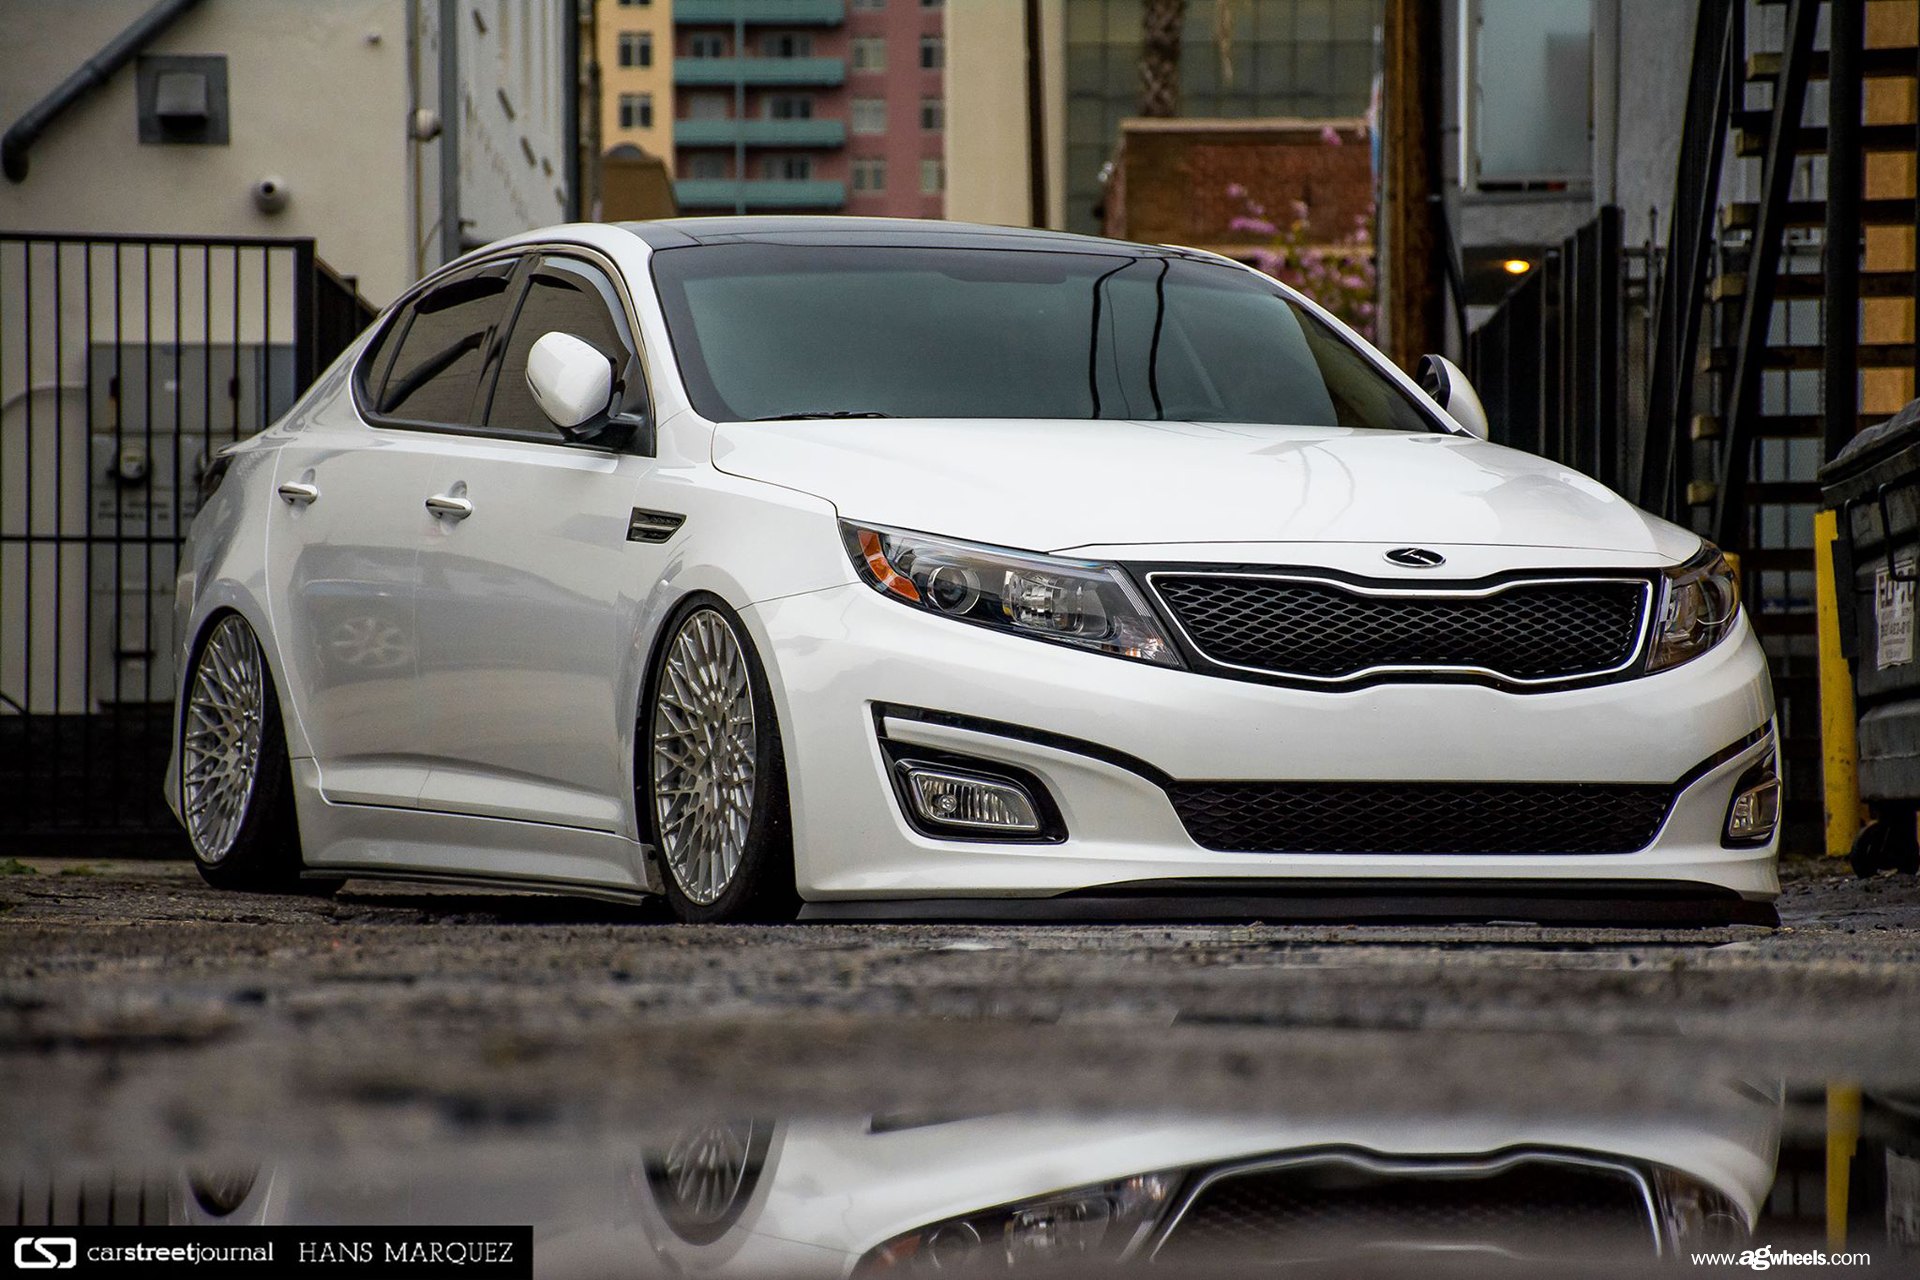 Kia Optima with a Perfect Stance - Photo by Avant Garde